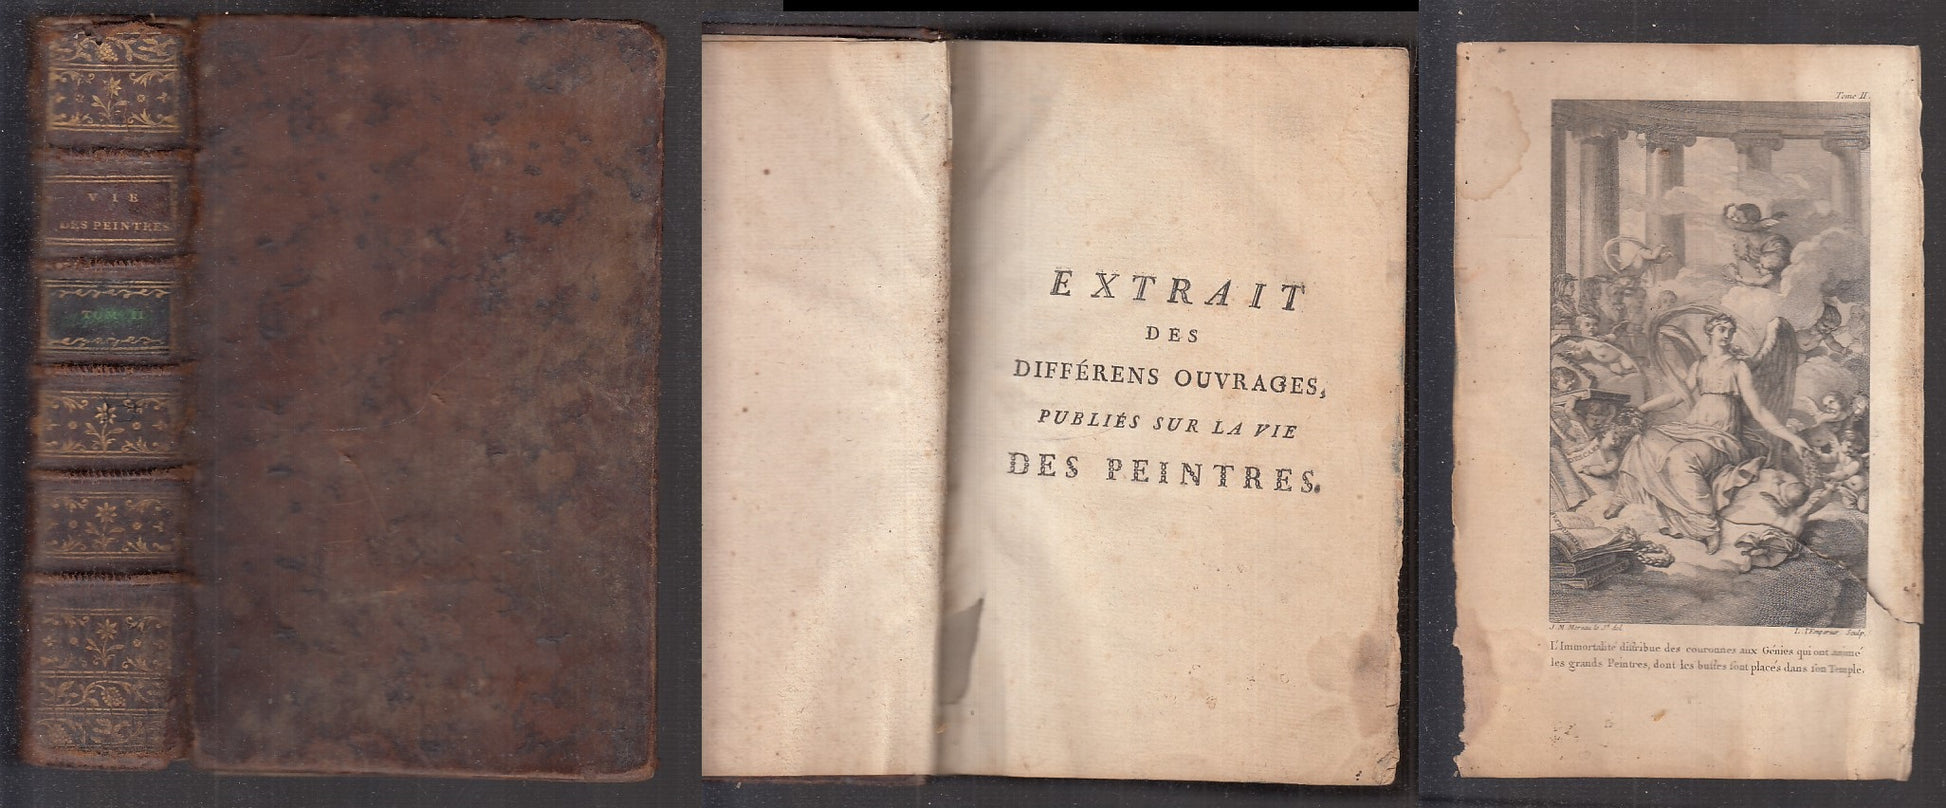 LH- EXTRAIT DIFFERENS OUVRAGES TOME II SETTECENTINA -- RUAULT--- 1776- C- XFS106